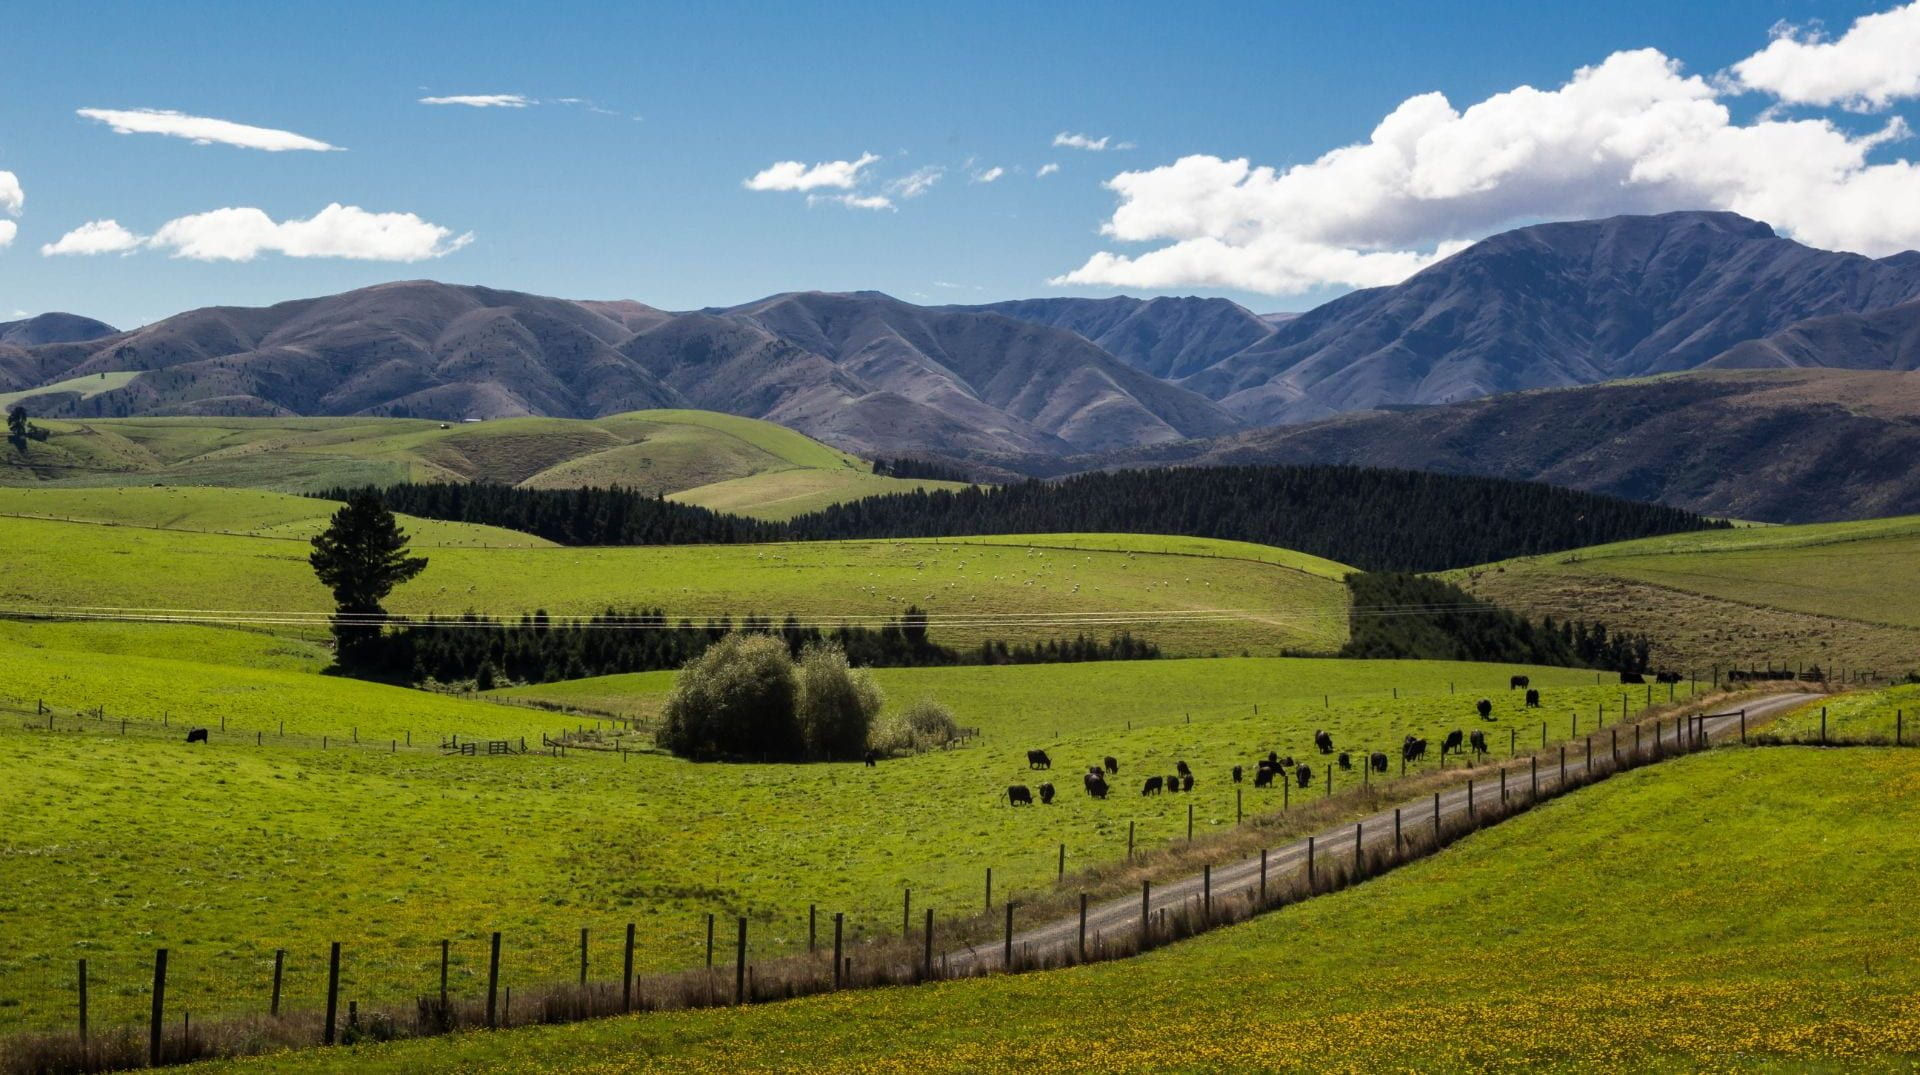 New Zealand grazing pasture with mountains in the background and a farm track alongside the paddocks.